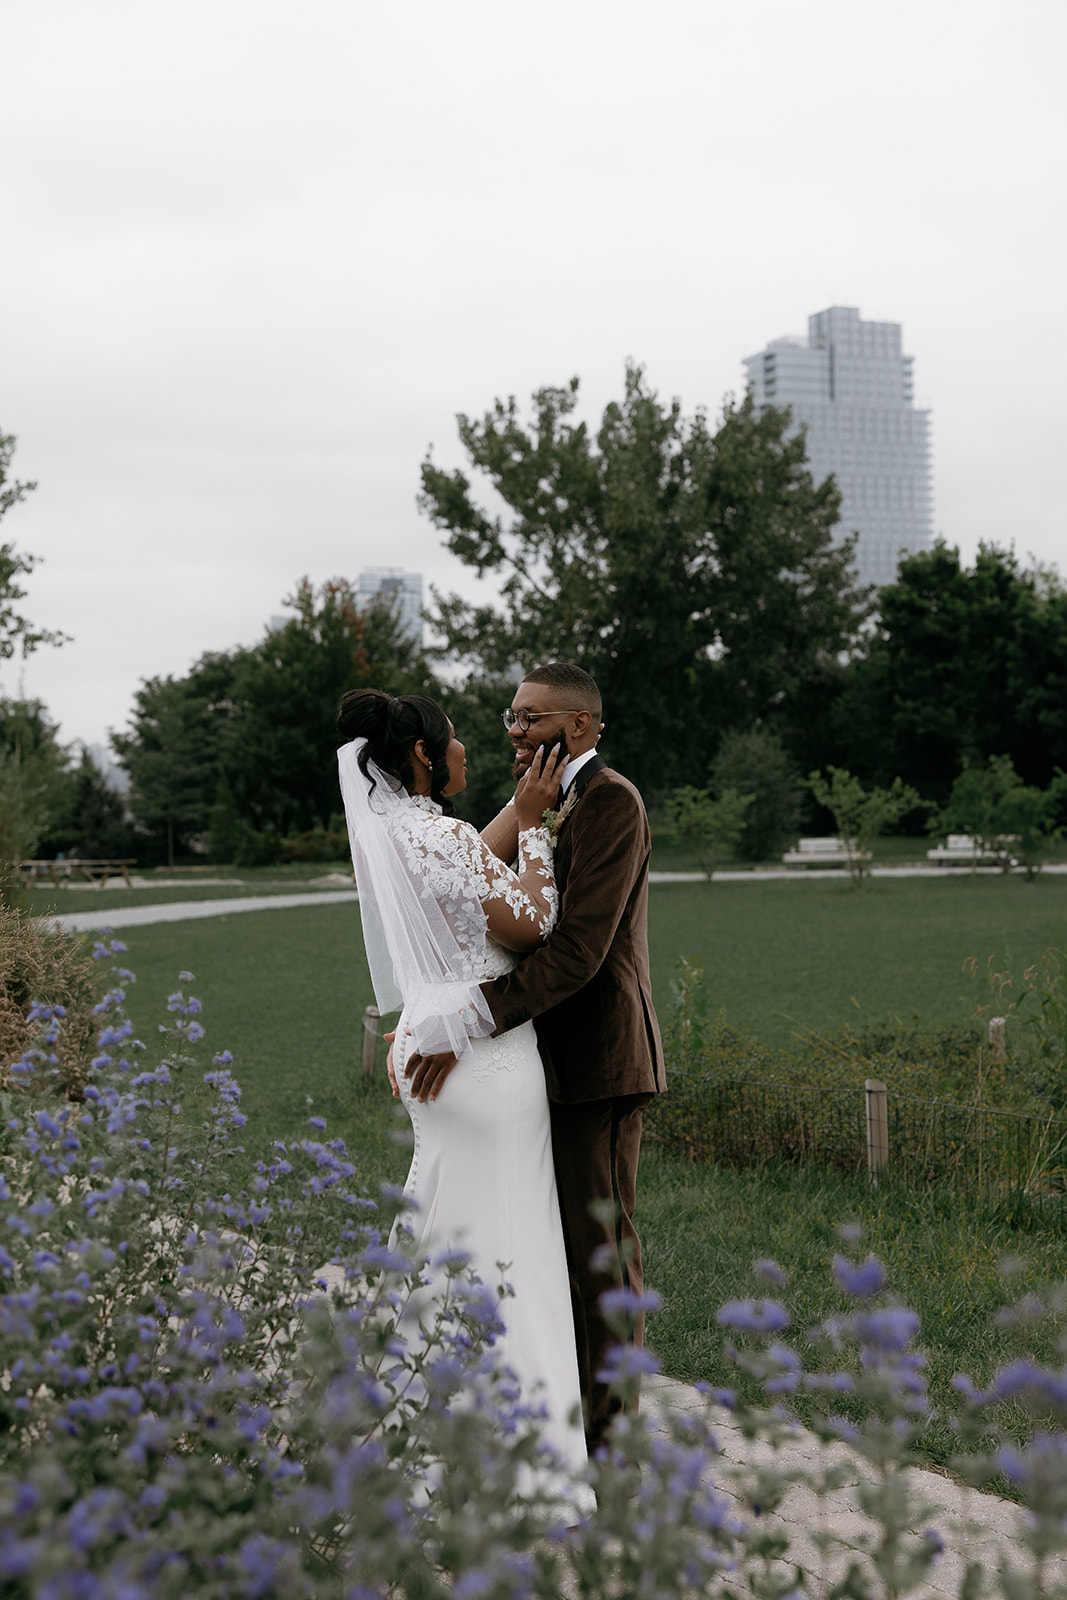 A bride and groom take pictures at Marsha P. Johnson State Park in Brooklyn